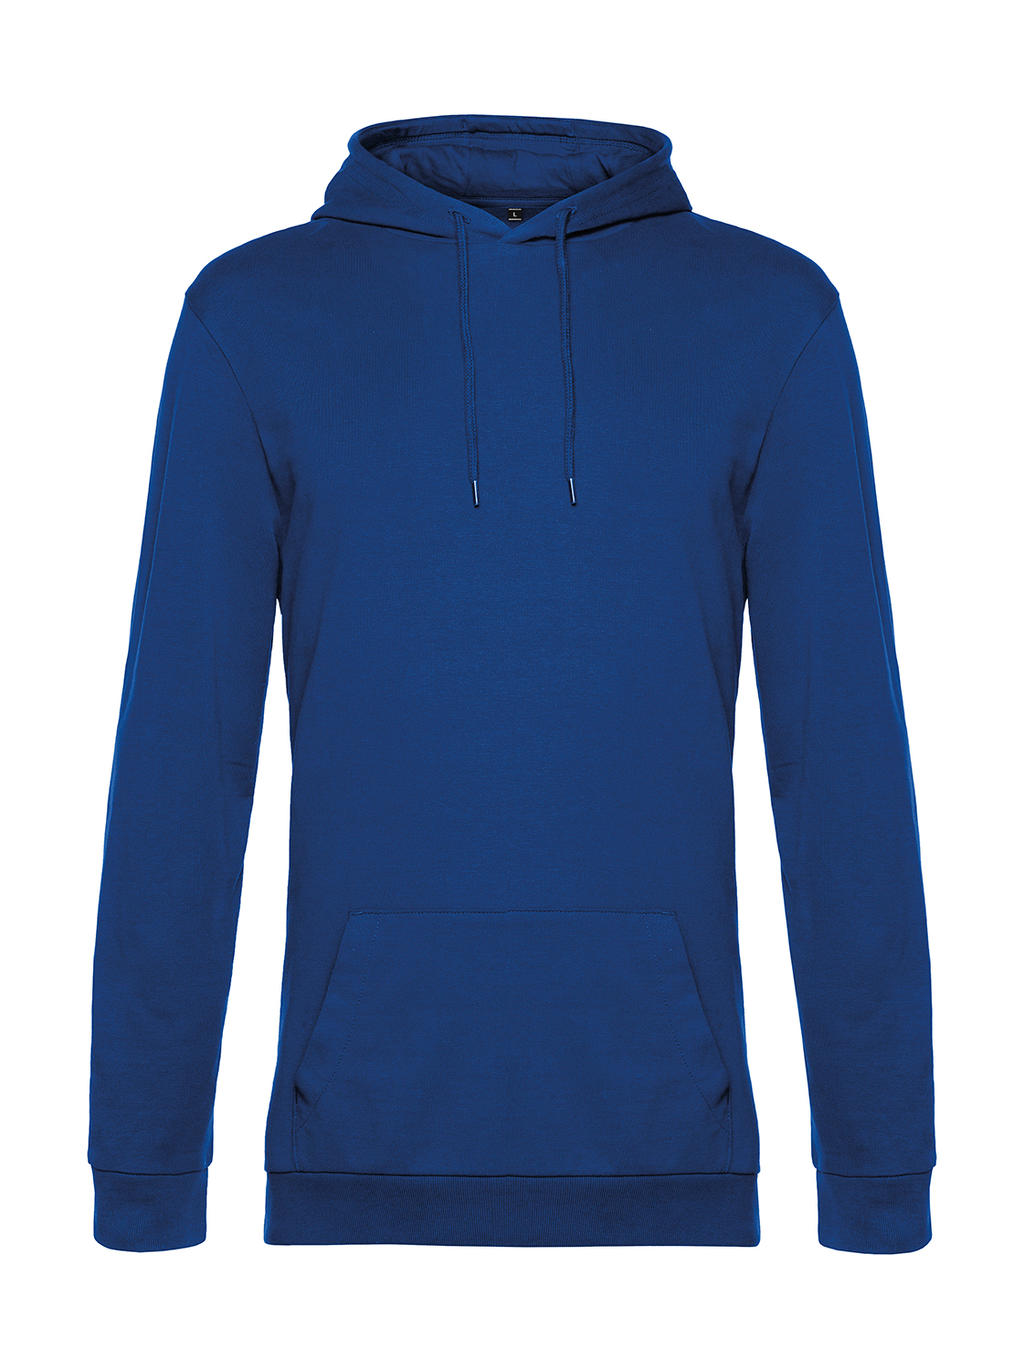  #Hoodie French Terry in Farbe Royal